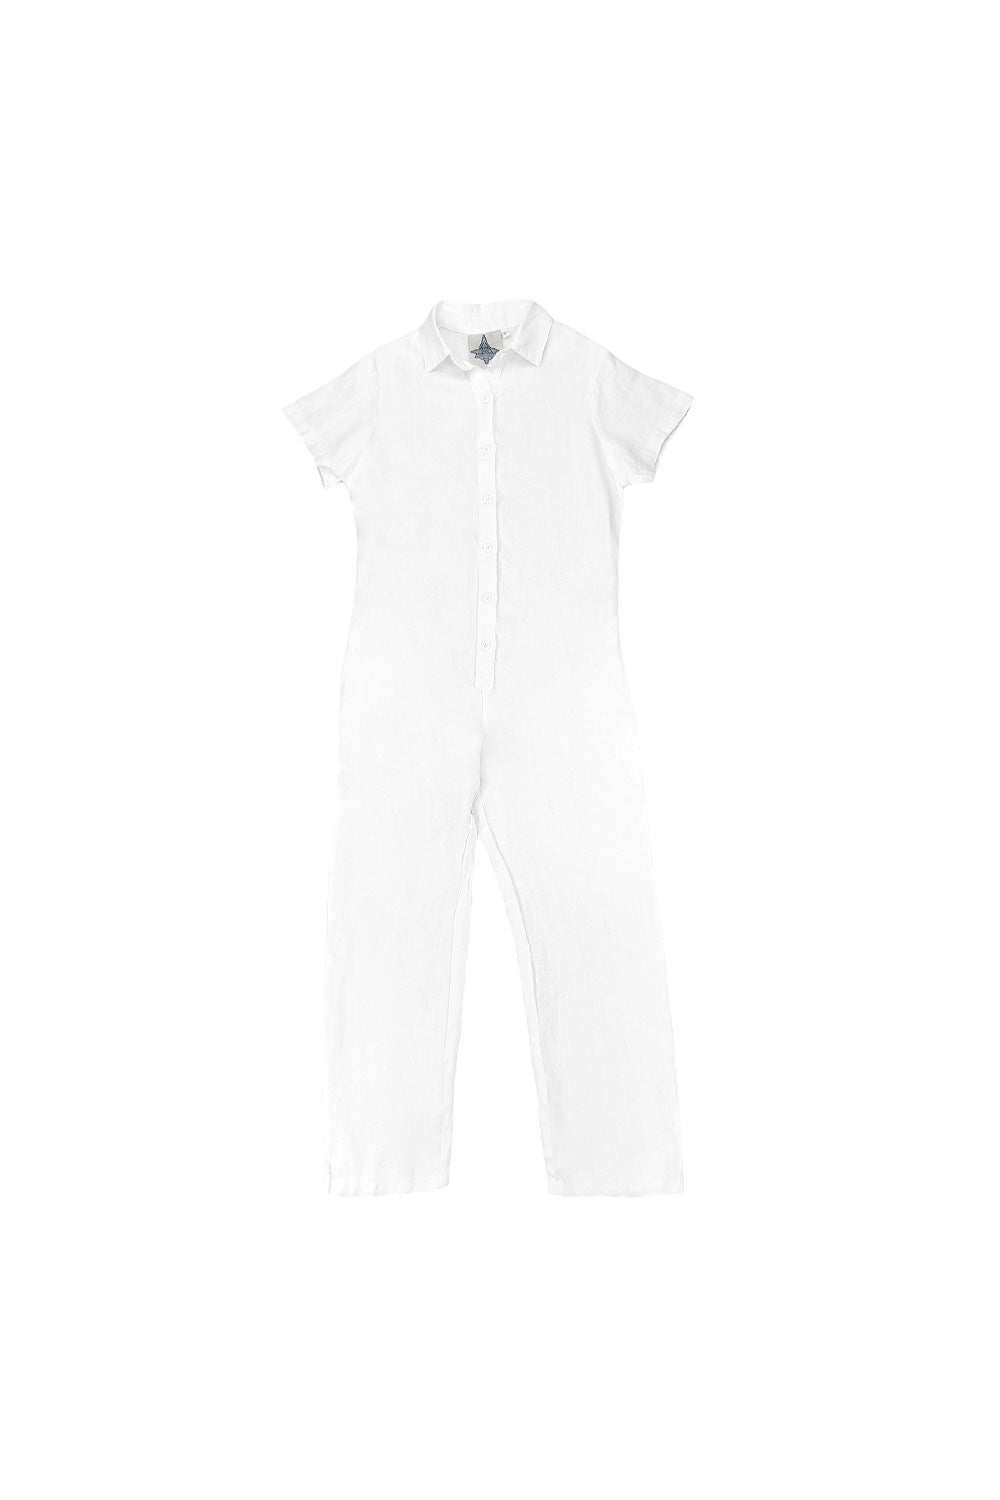 Stillwater Polo Pant Romper | Jungmaven Hemp Clothing & Accessories / Color: Washed White